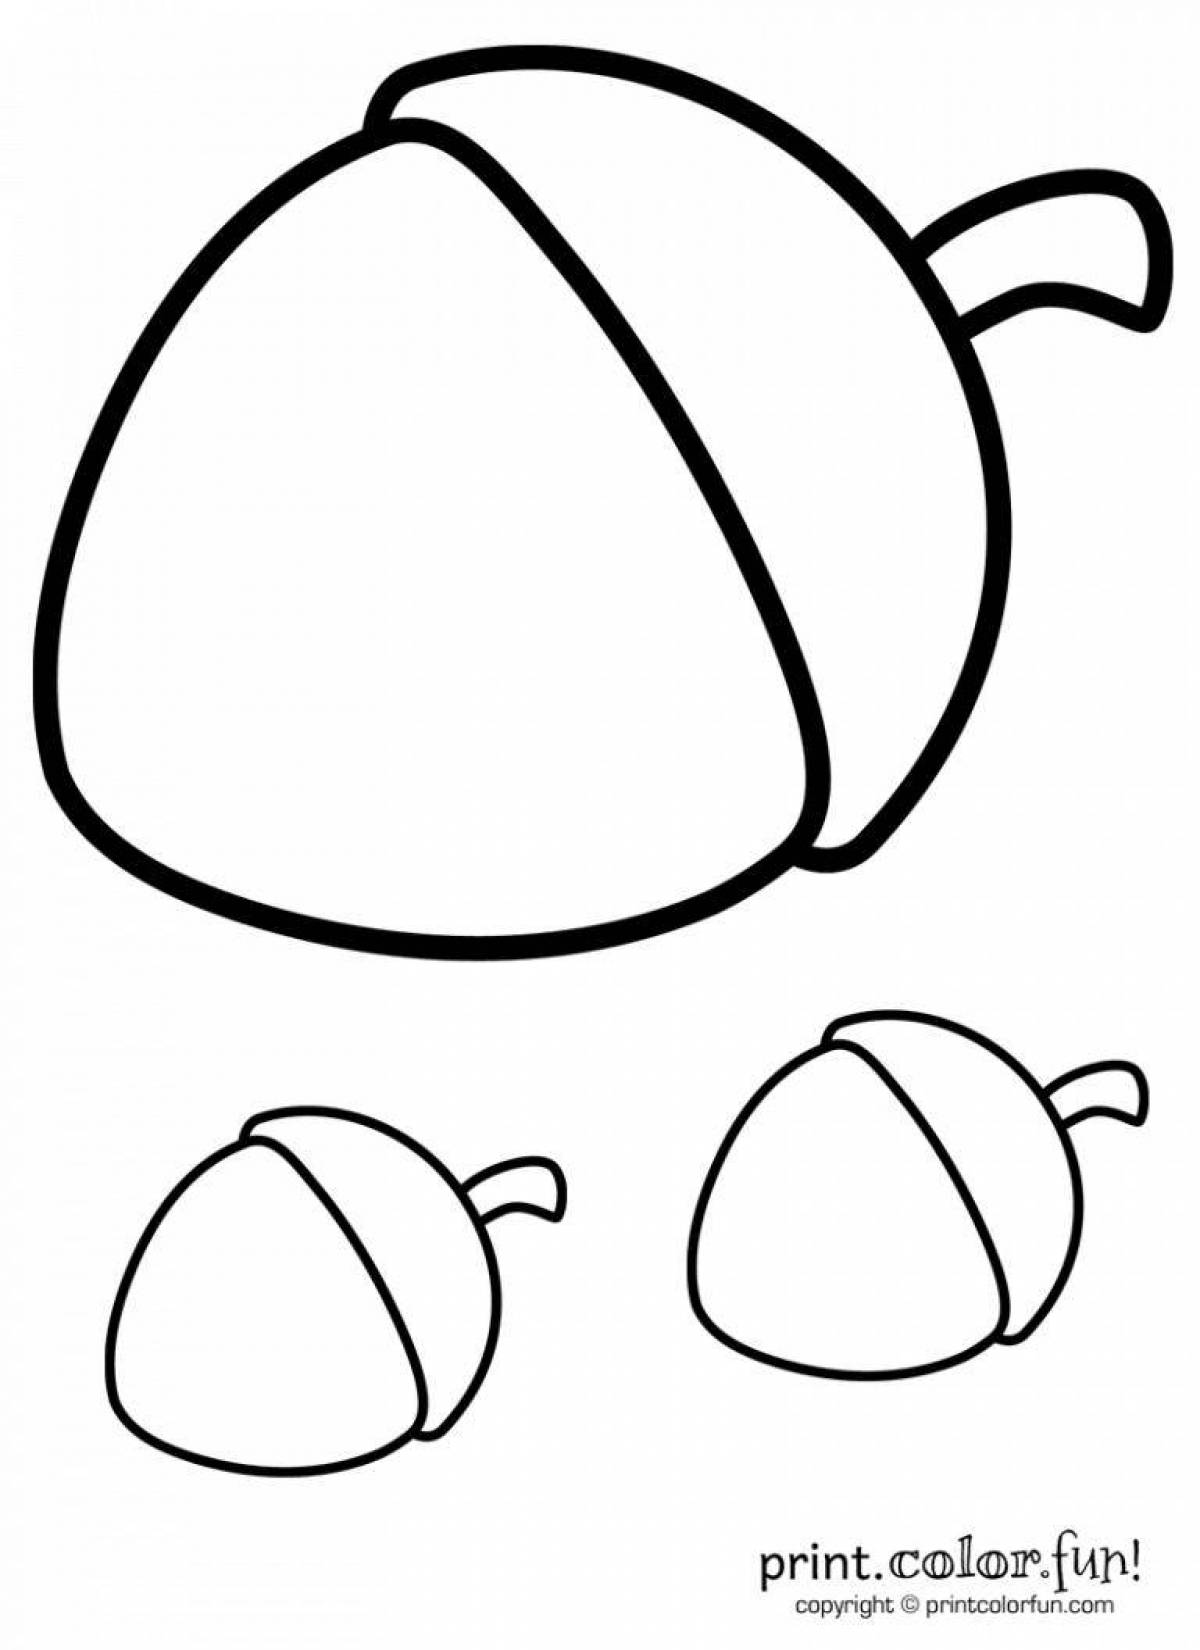 Fun coloring pages with nuts for kids